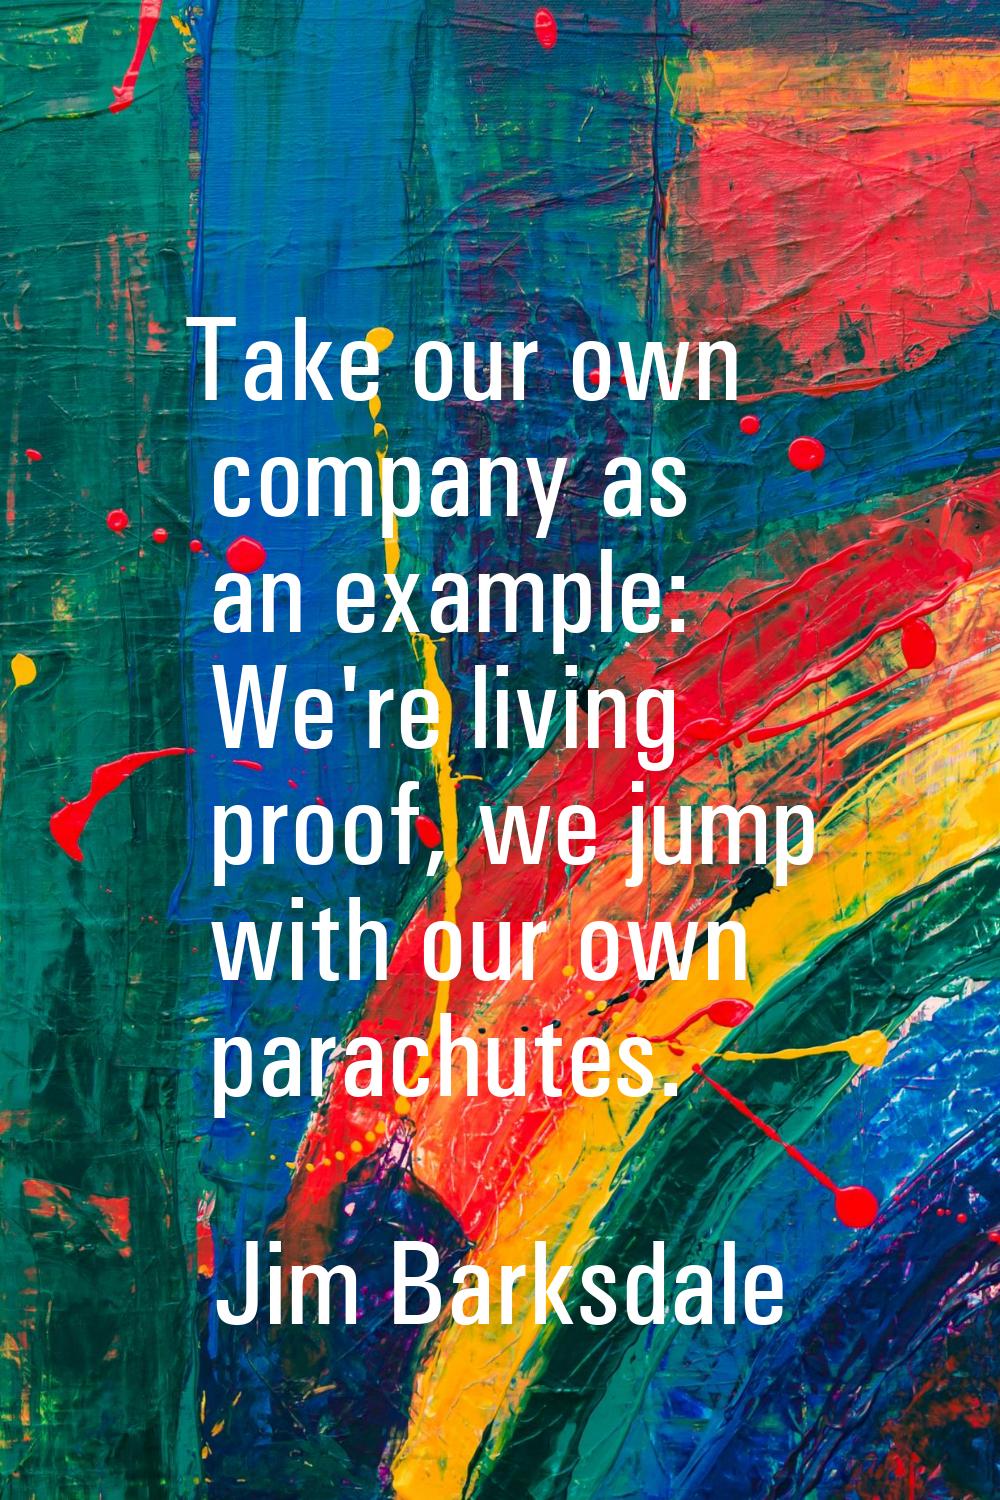 Take our own company as an example: We're living proof, we jump with our own parachutes.